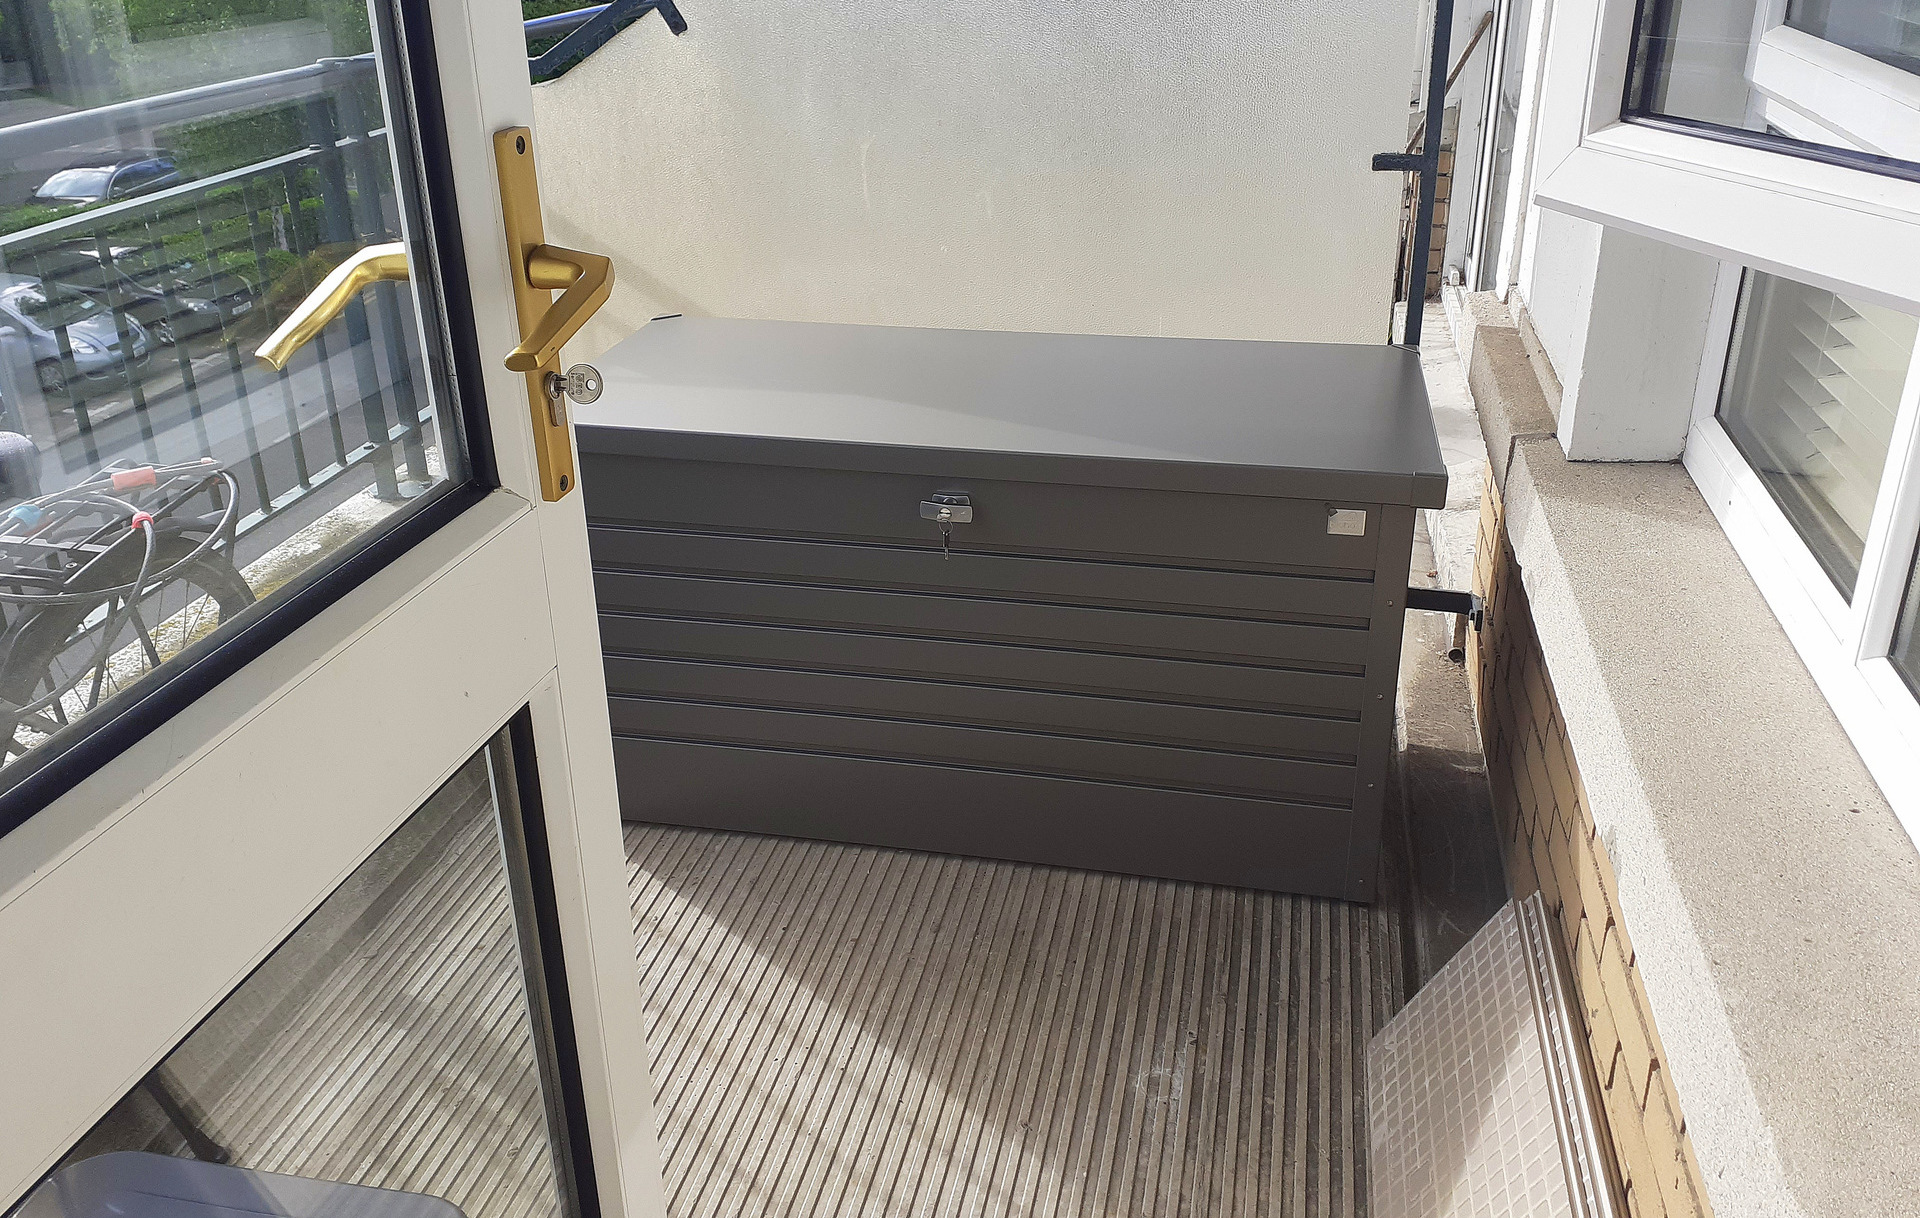 LeisureTime Box 130 in metallic quartz  grey - compact & rainproof storage boxes ideal for use in Balcony spaces | on SALE now at Owen Chubb GardenStudio, Tel 087-2306 128